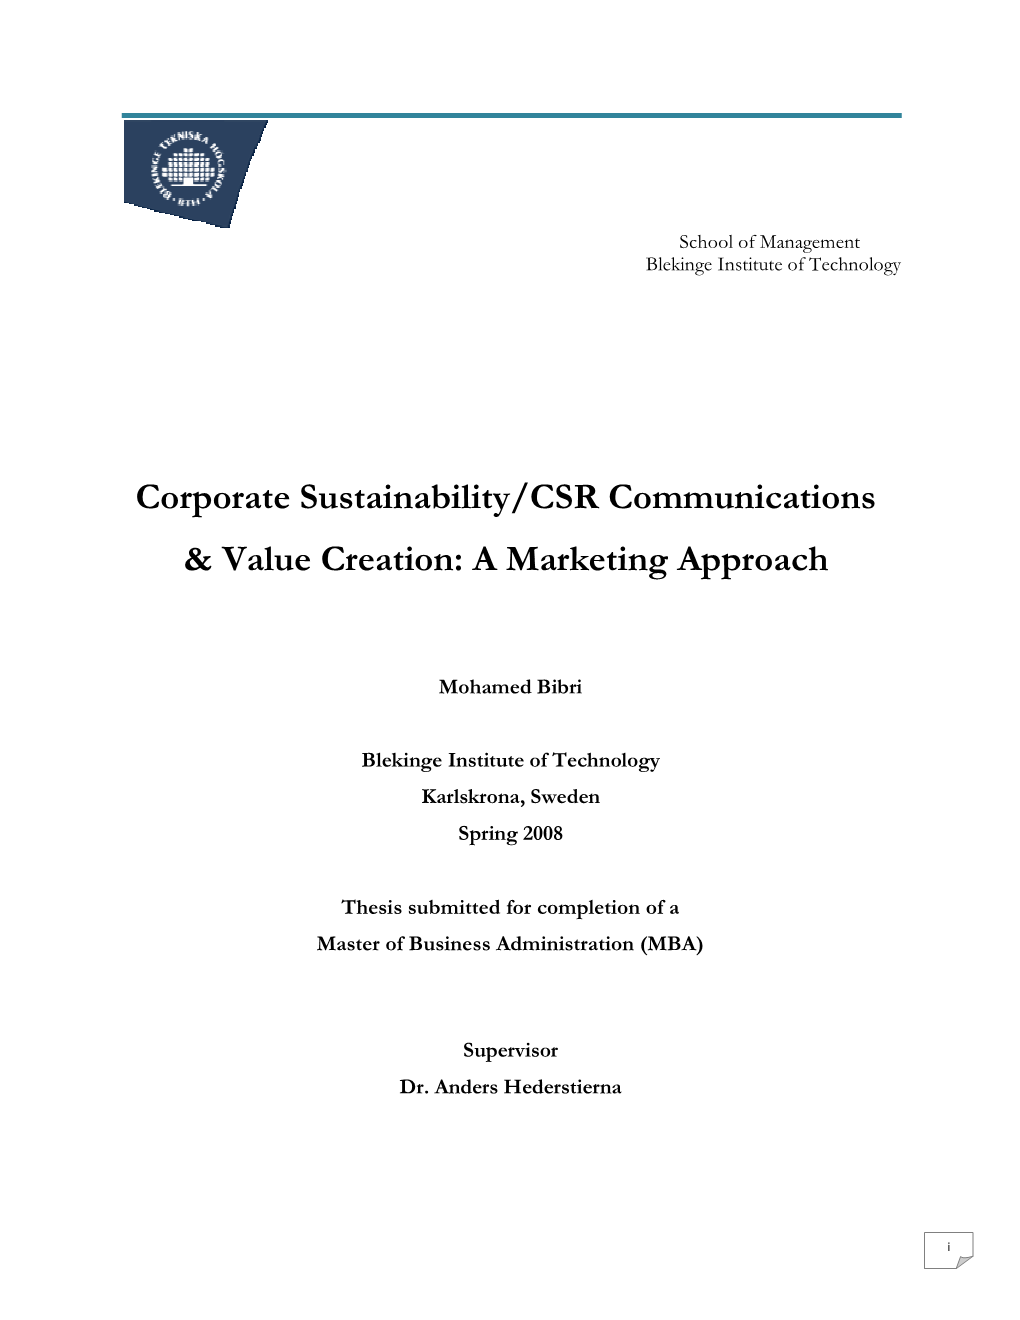 Corporate Sustainability/CSR Communications & Value Creation: a Marketing Approach